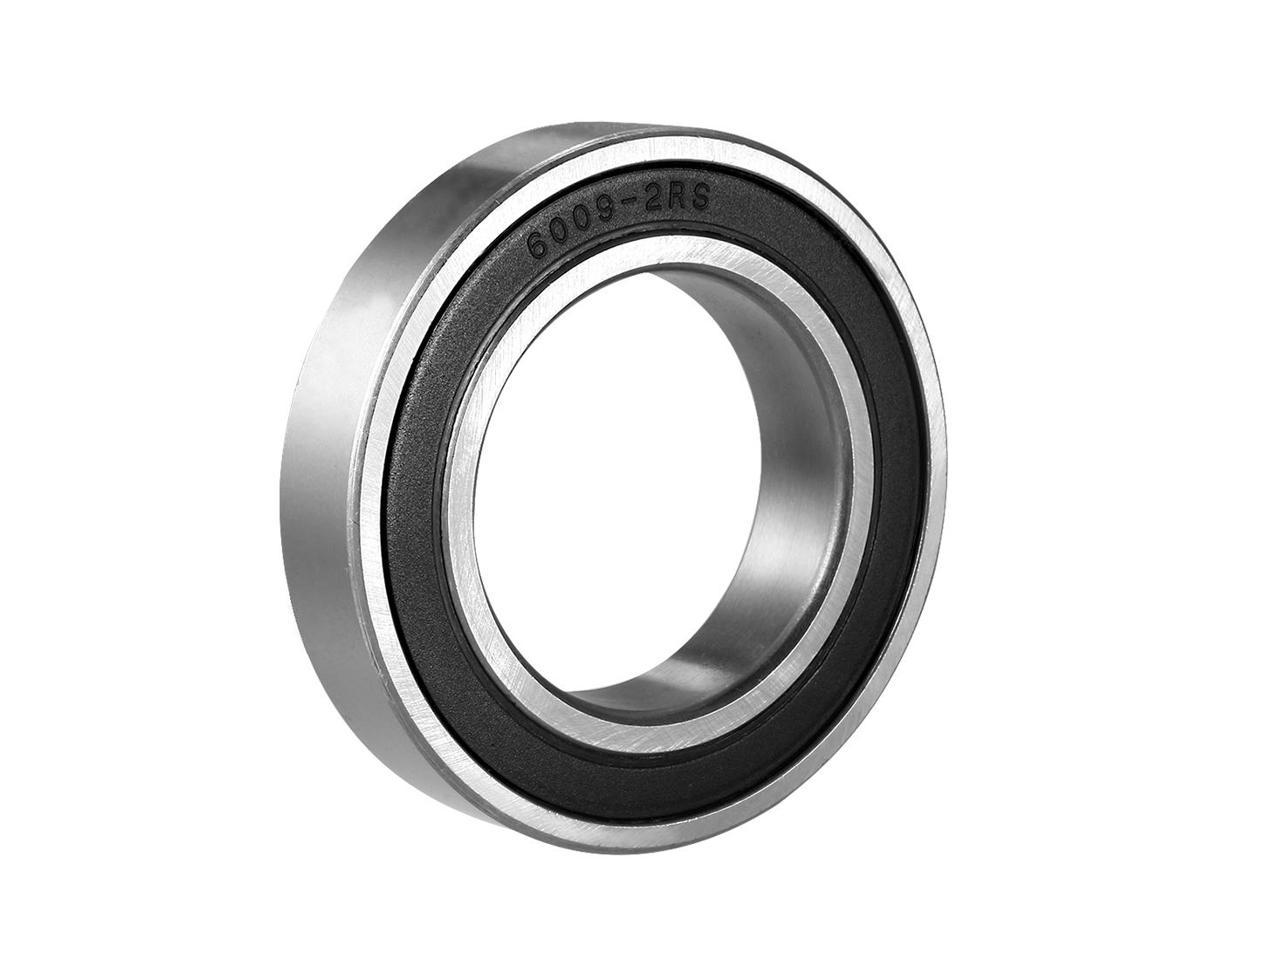 10x 6009 2RS Rubber Sealed Deep Groove Ball Bearings 45x75x16 mm 